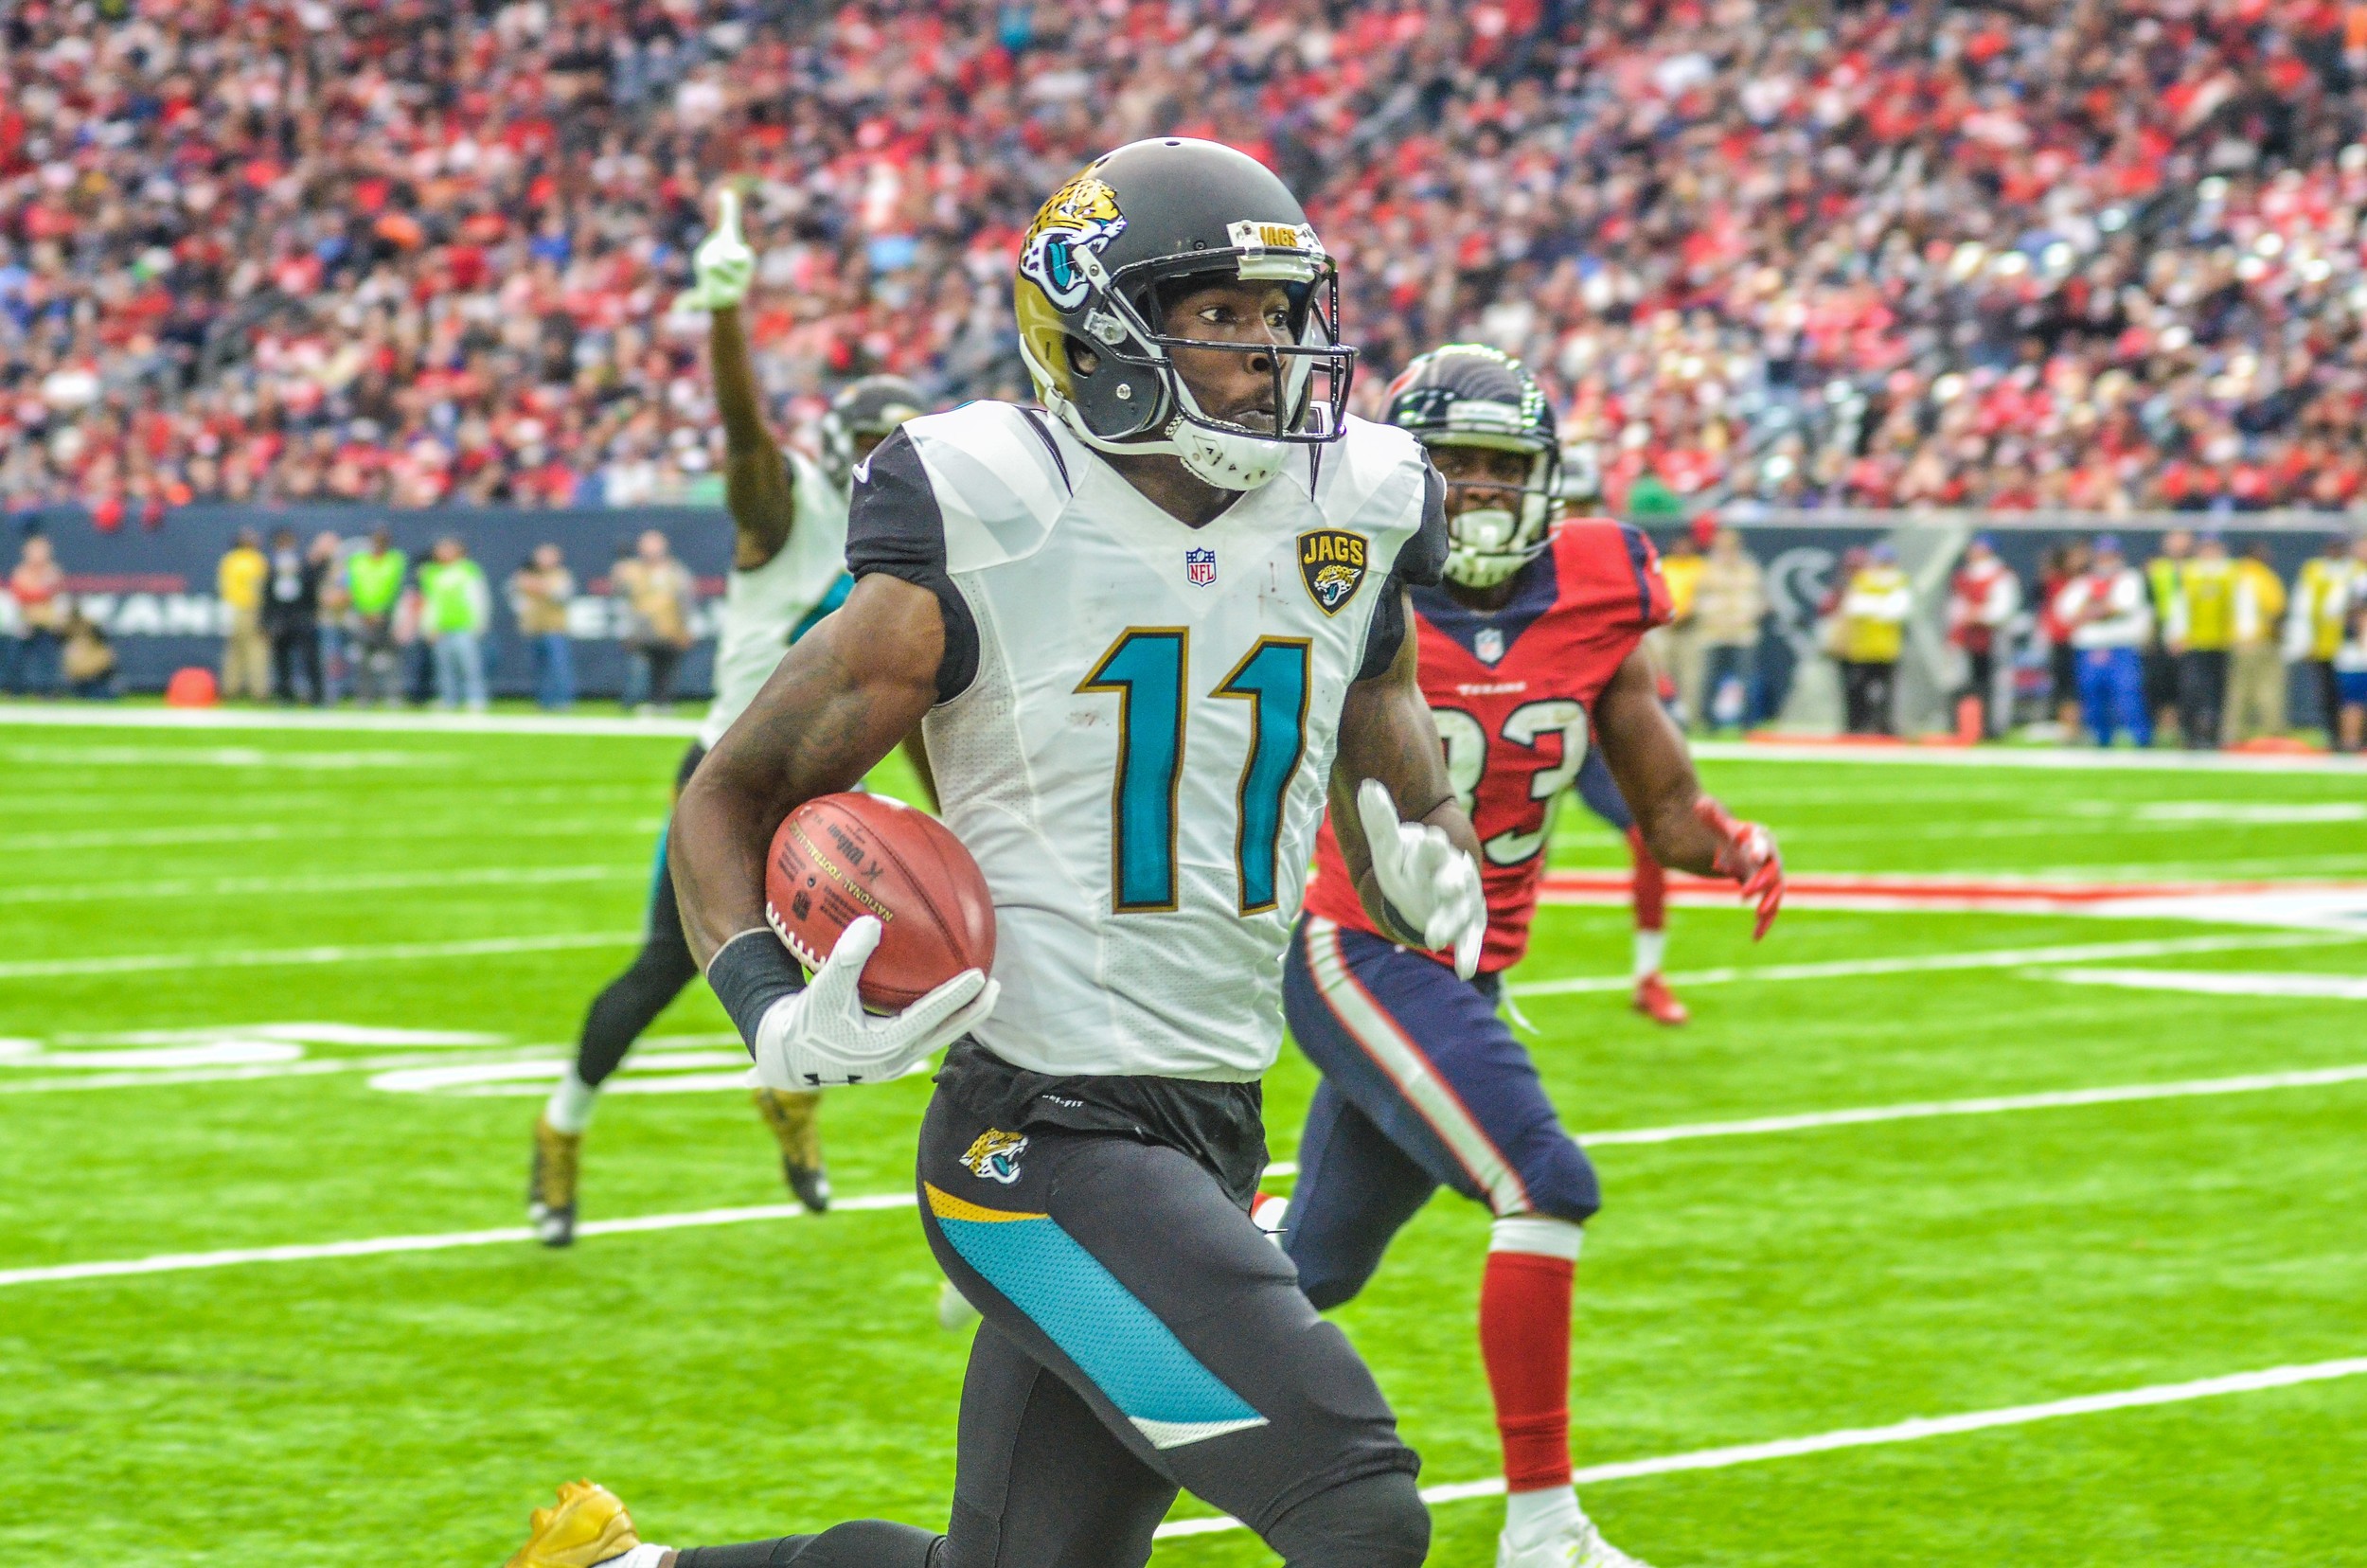 Marqise Lee’s (11) 100-yard kickoff return for a touchdown at the 6:50 mark of the third quarter gave Jacksonville a 20-8 lead. Photo by Rick Wilson/Jacksonville Jaguars